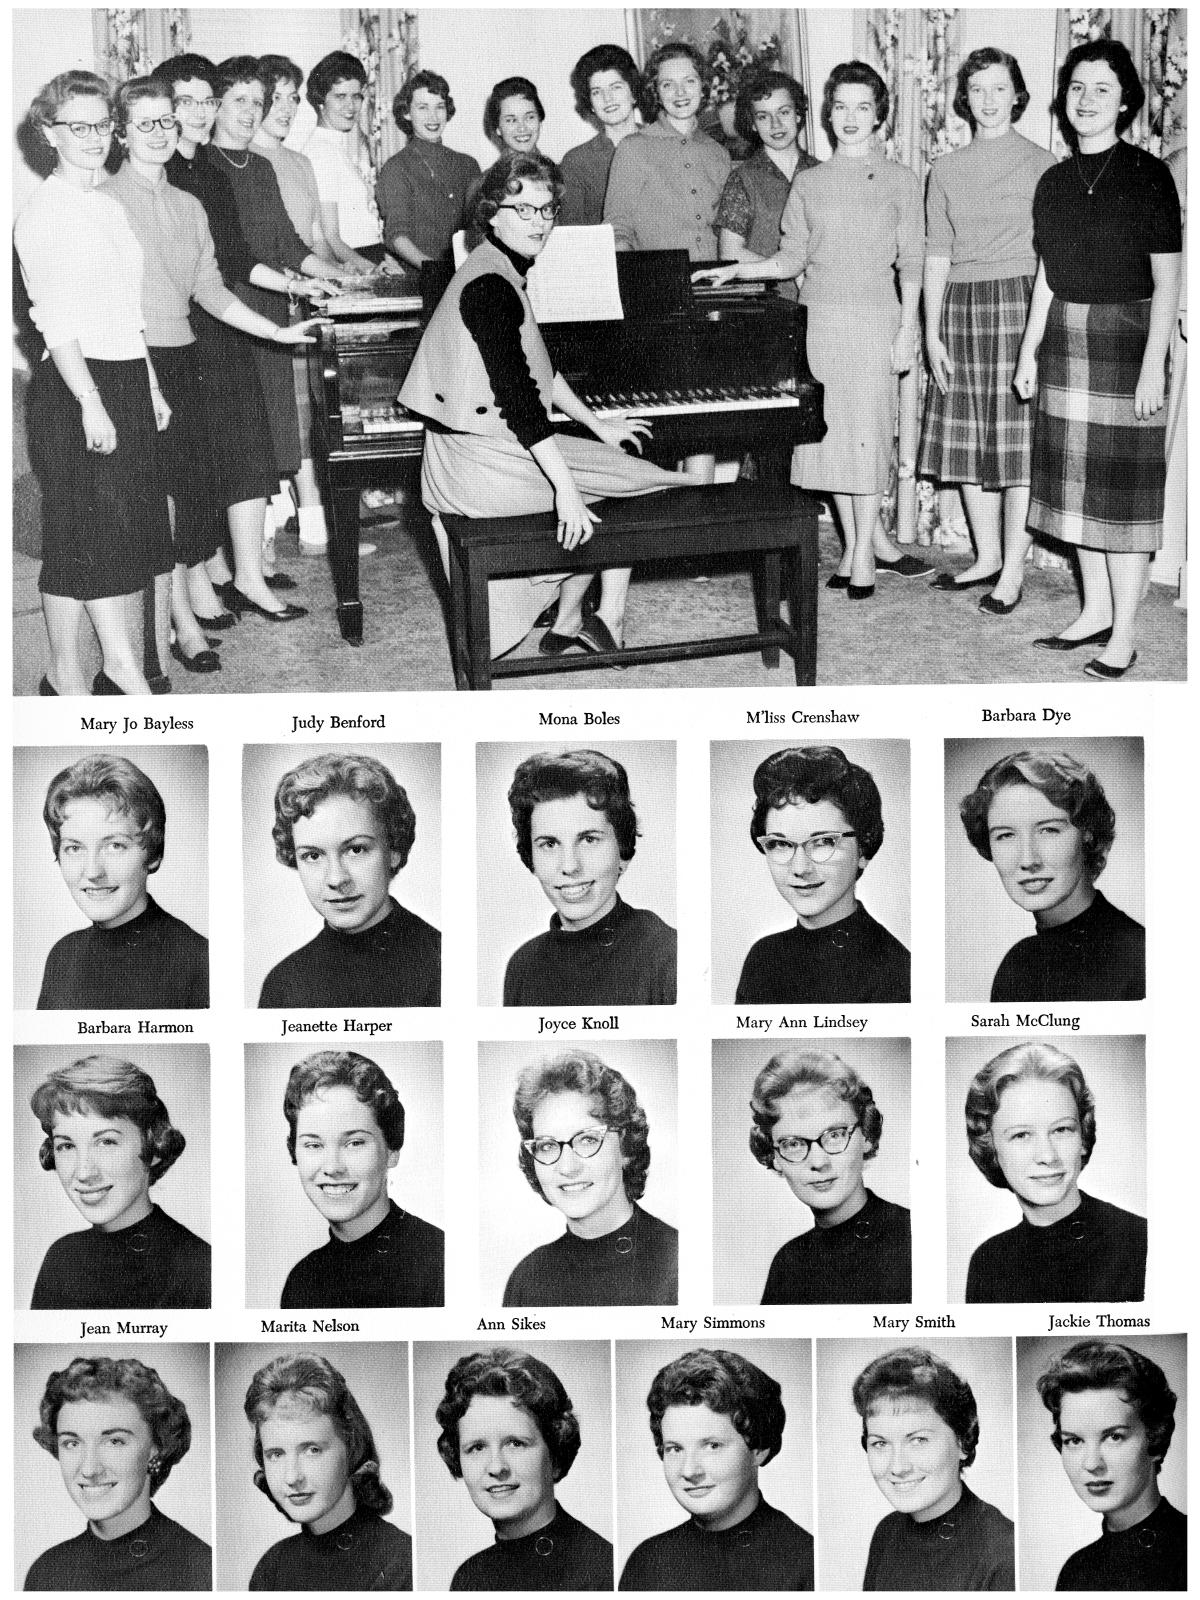 Prickly Pear, Yearbook of Abilene Christian College, 1960
                                                
                                                    83
                                                